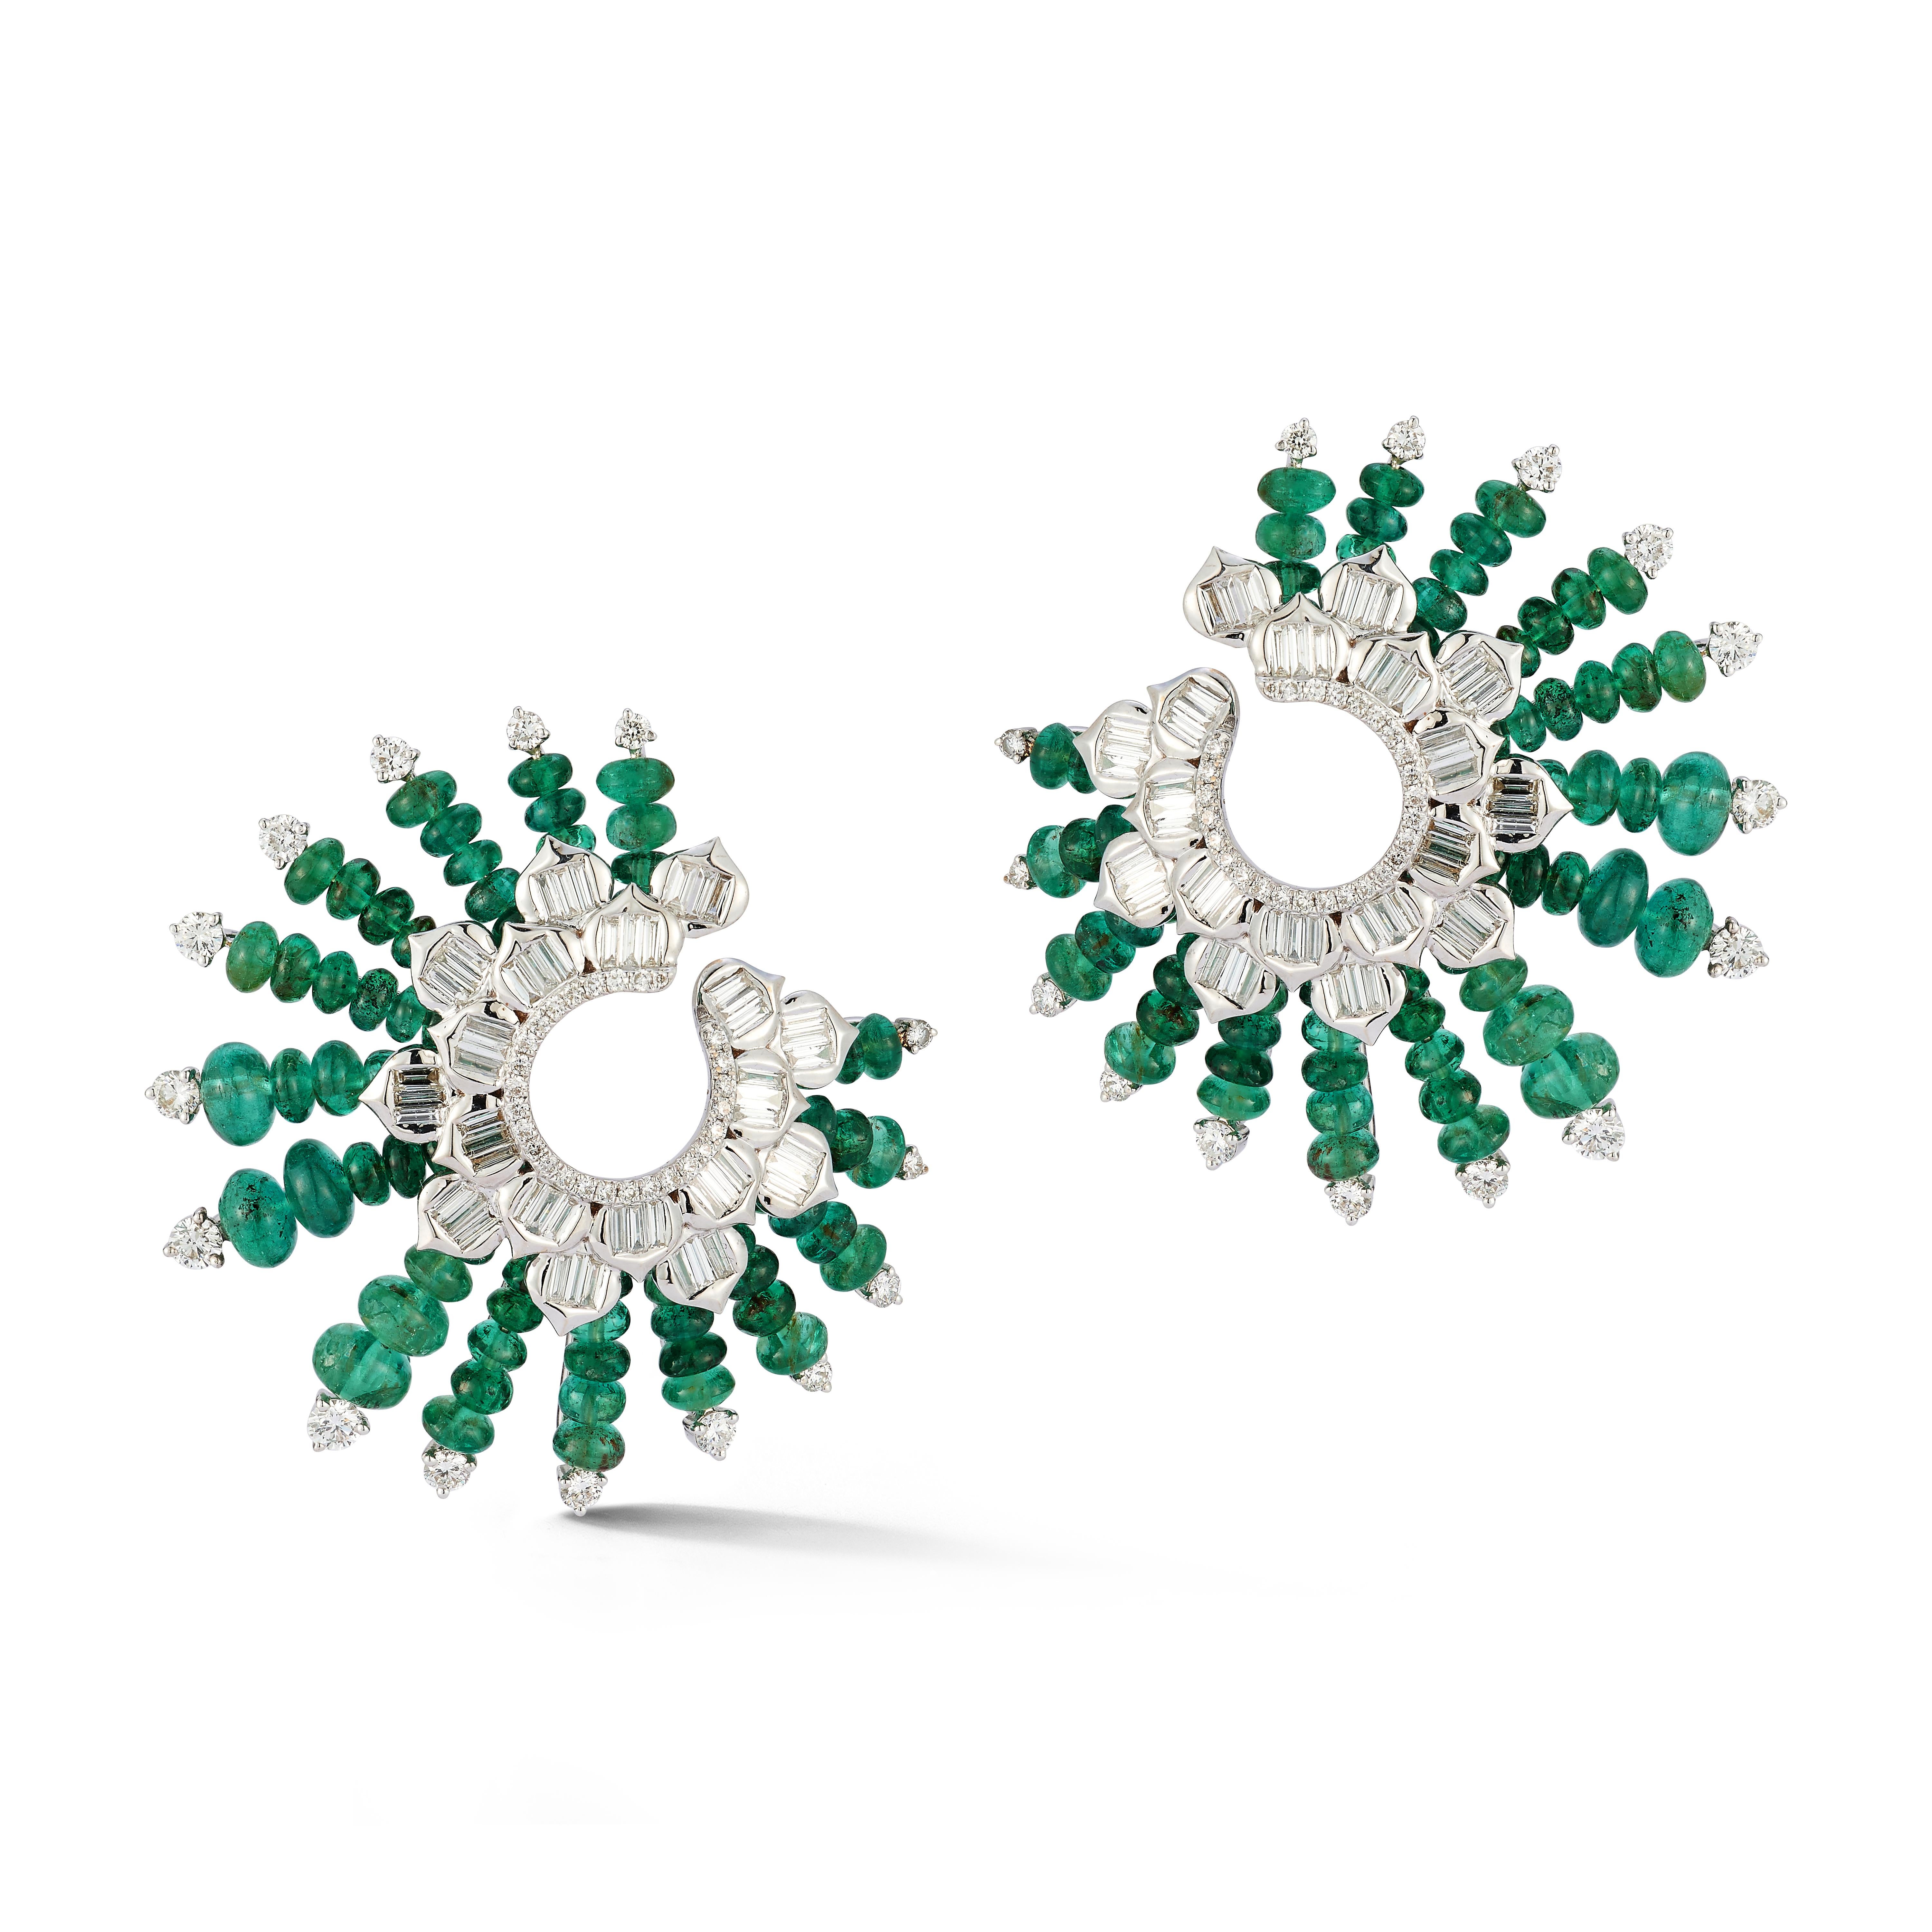 Emerald & Diamond Spiral Earrings

A pair of 18 karat white gold earrings set with round and baguette cut diamonds and emerald beads

Total Diamond Weight: 2.88 carats
Total Emerald Weight: 20.60 carats

Diameter: 1.5